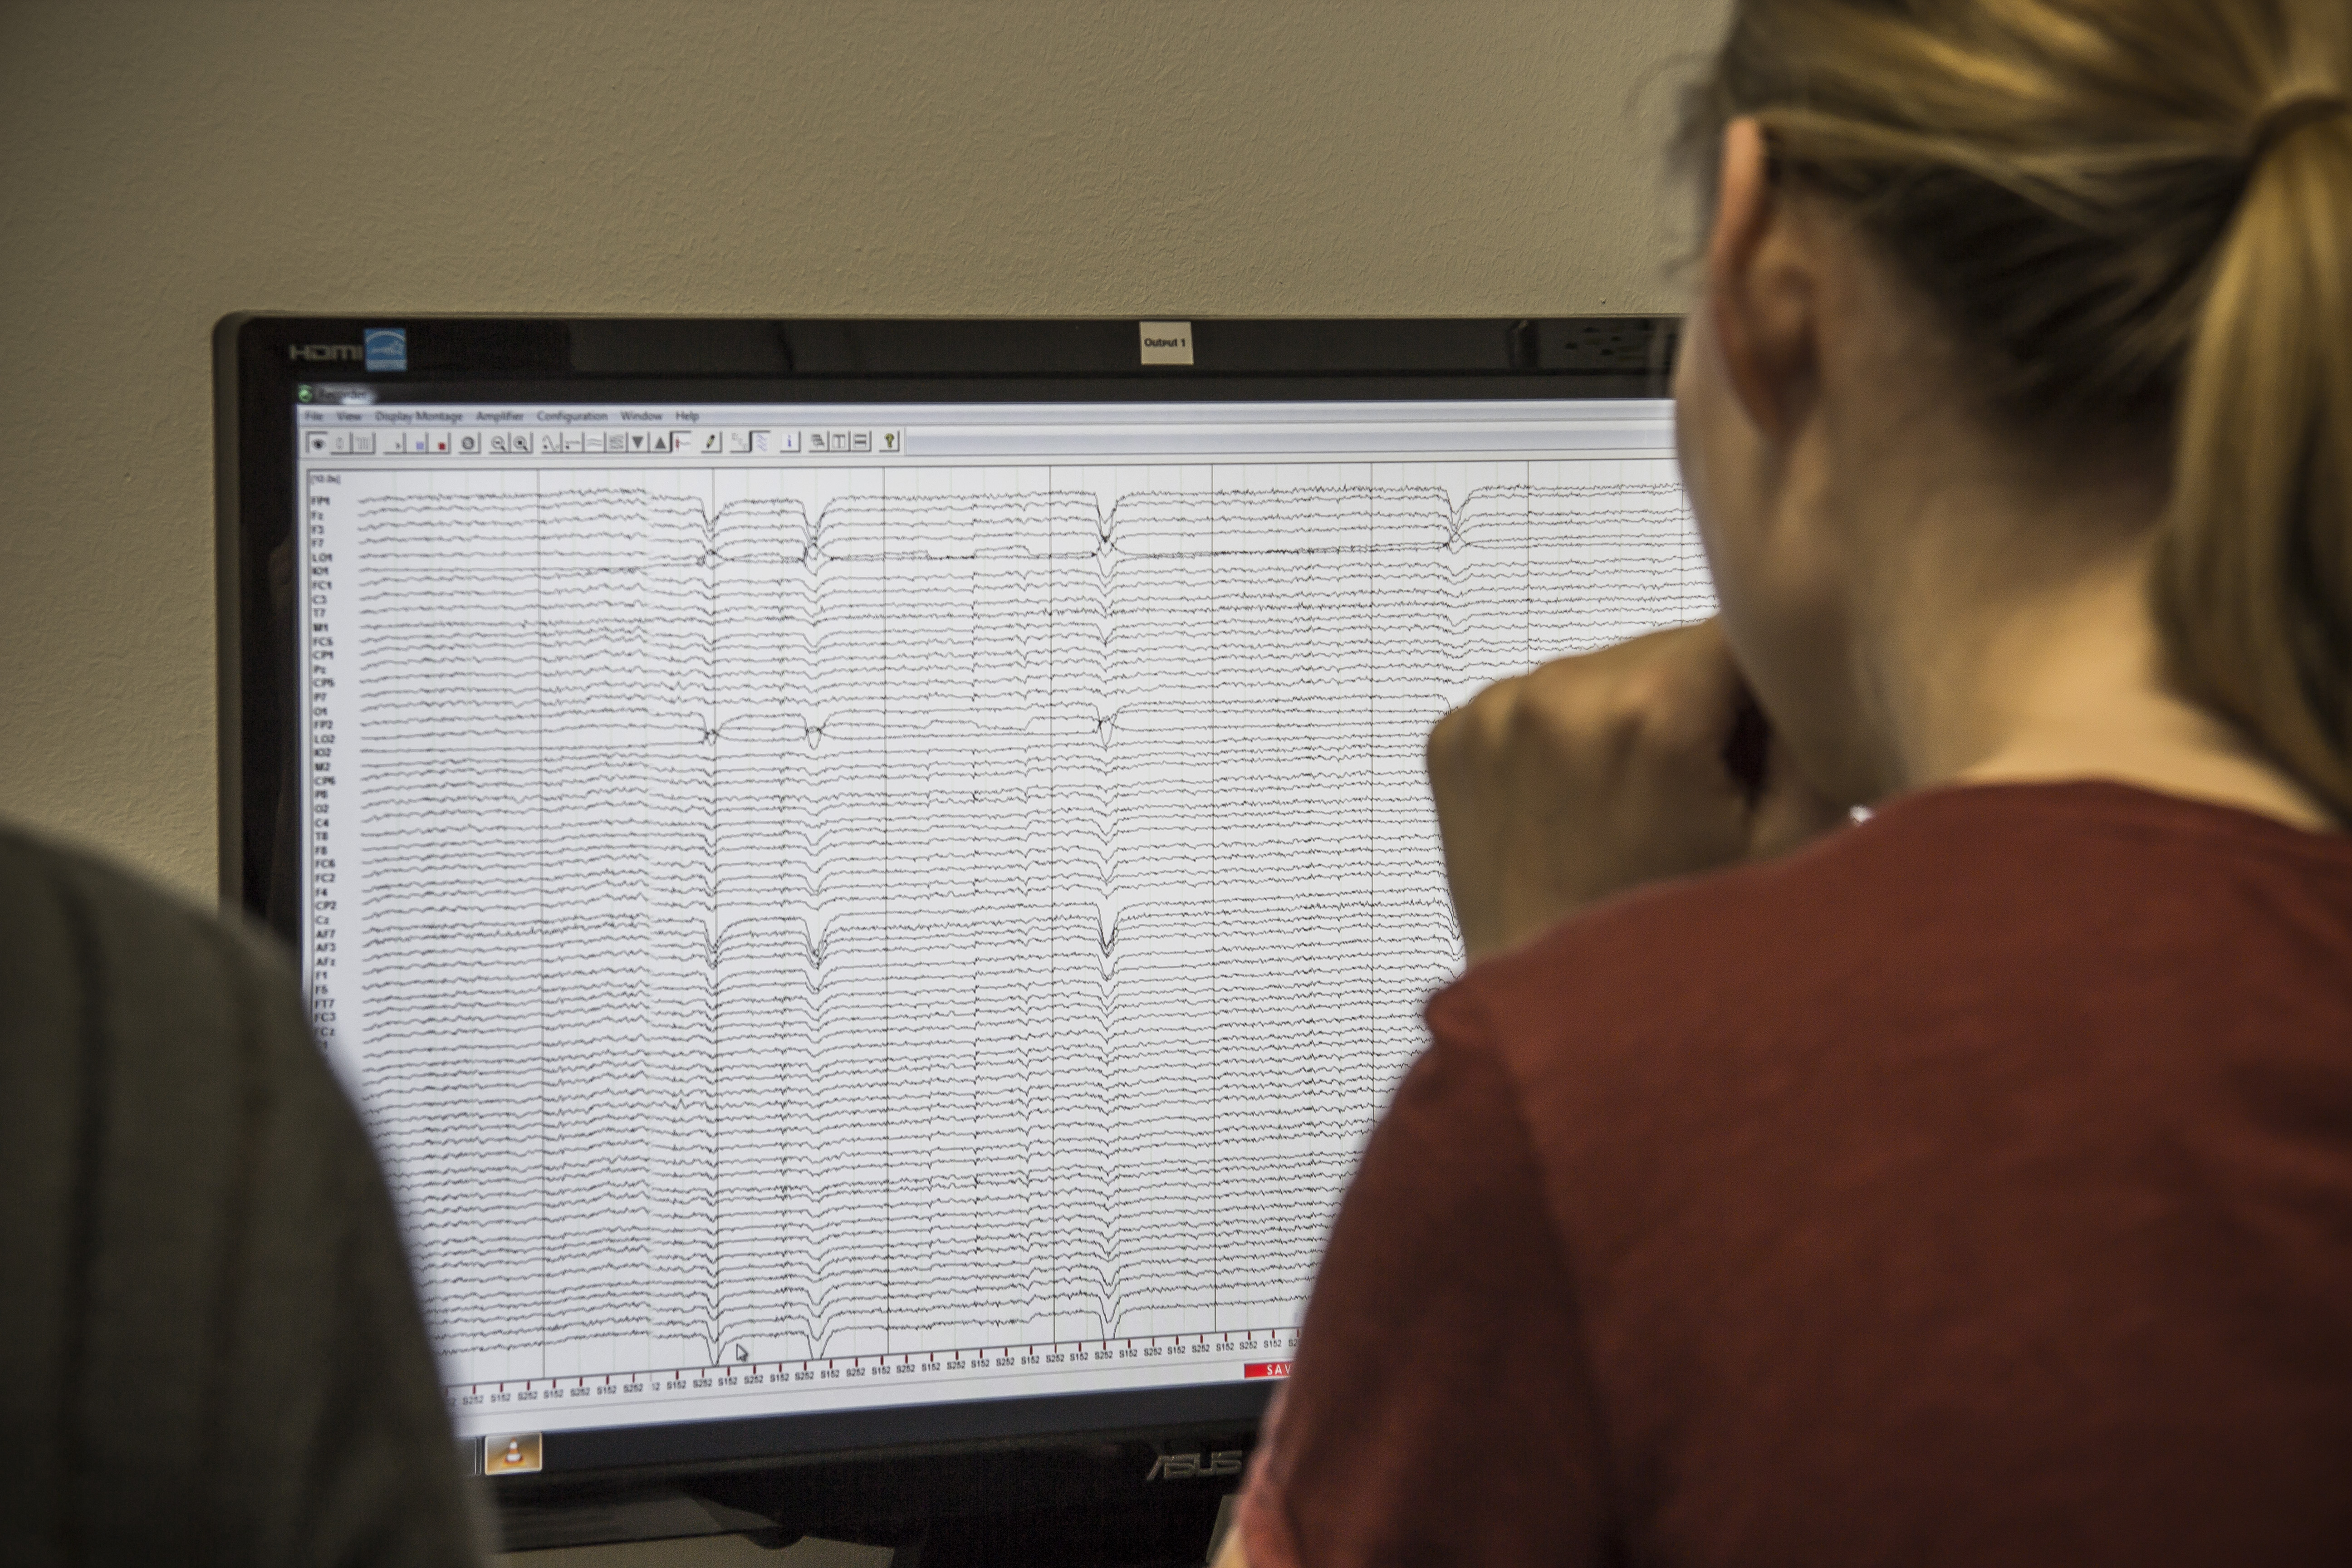 Person looking at EEG data on a computer screen